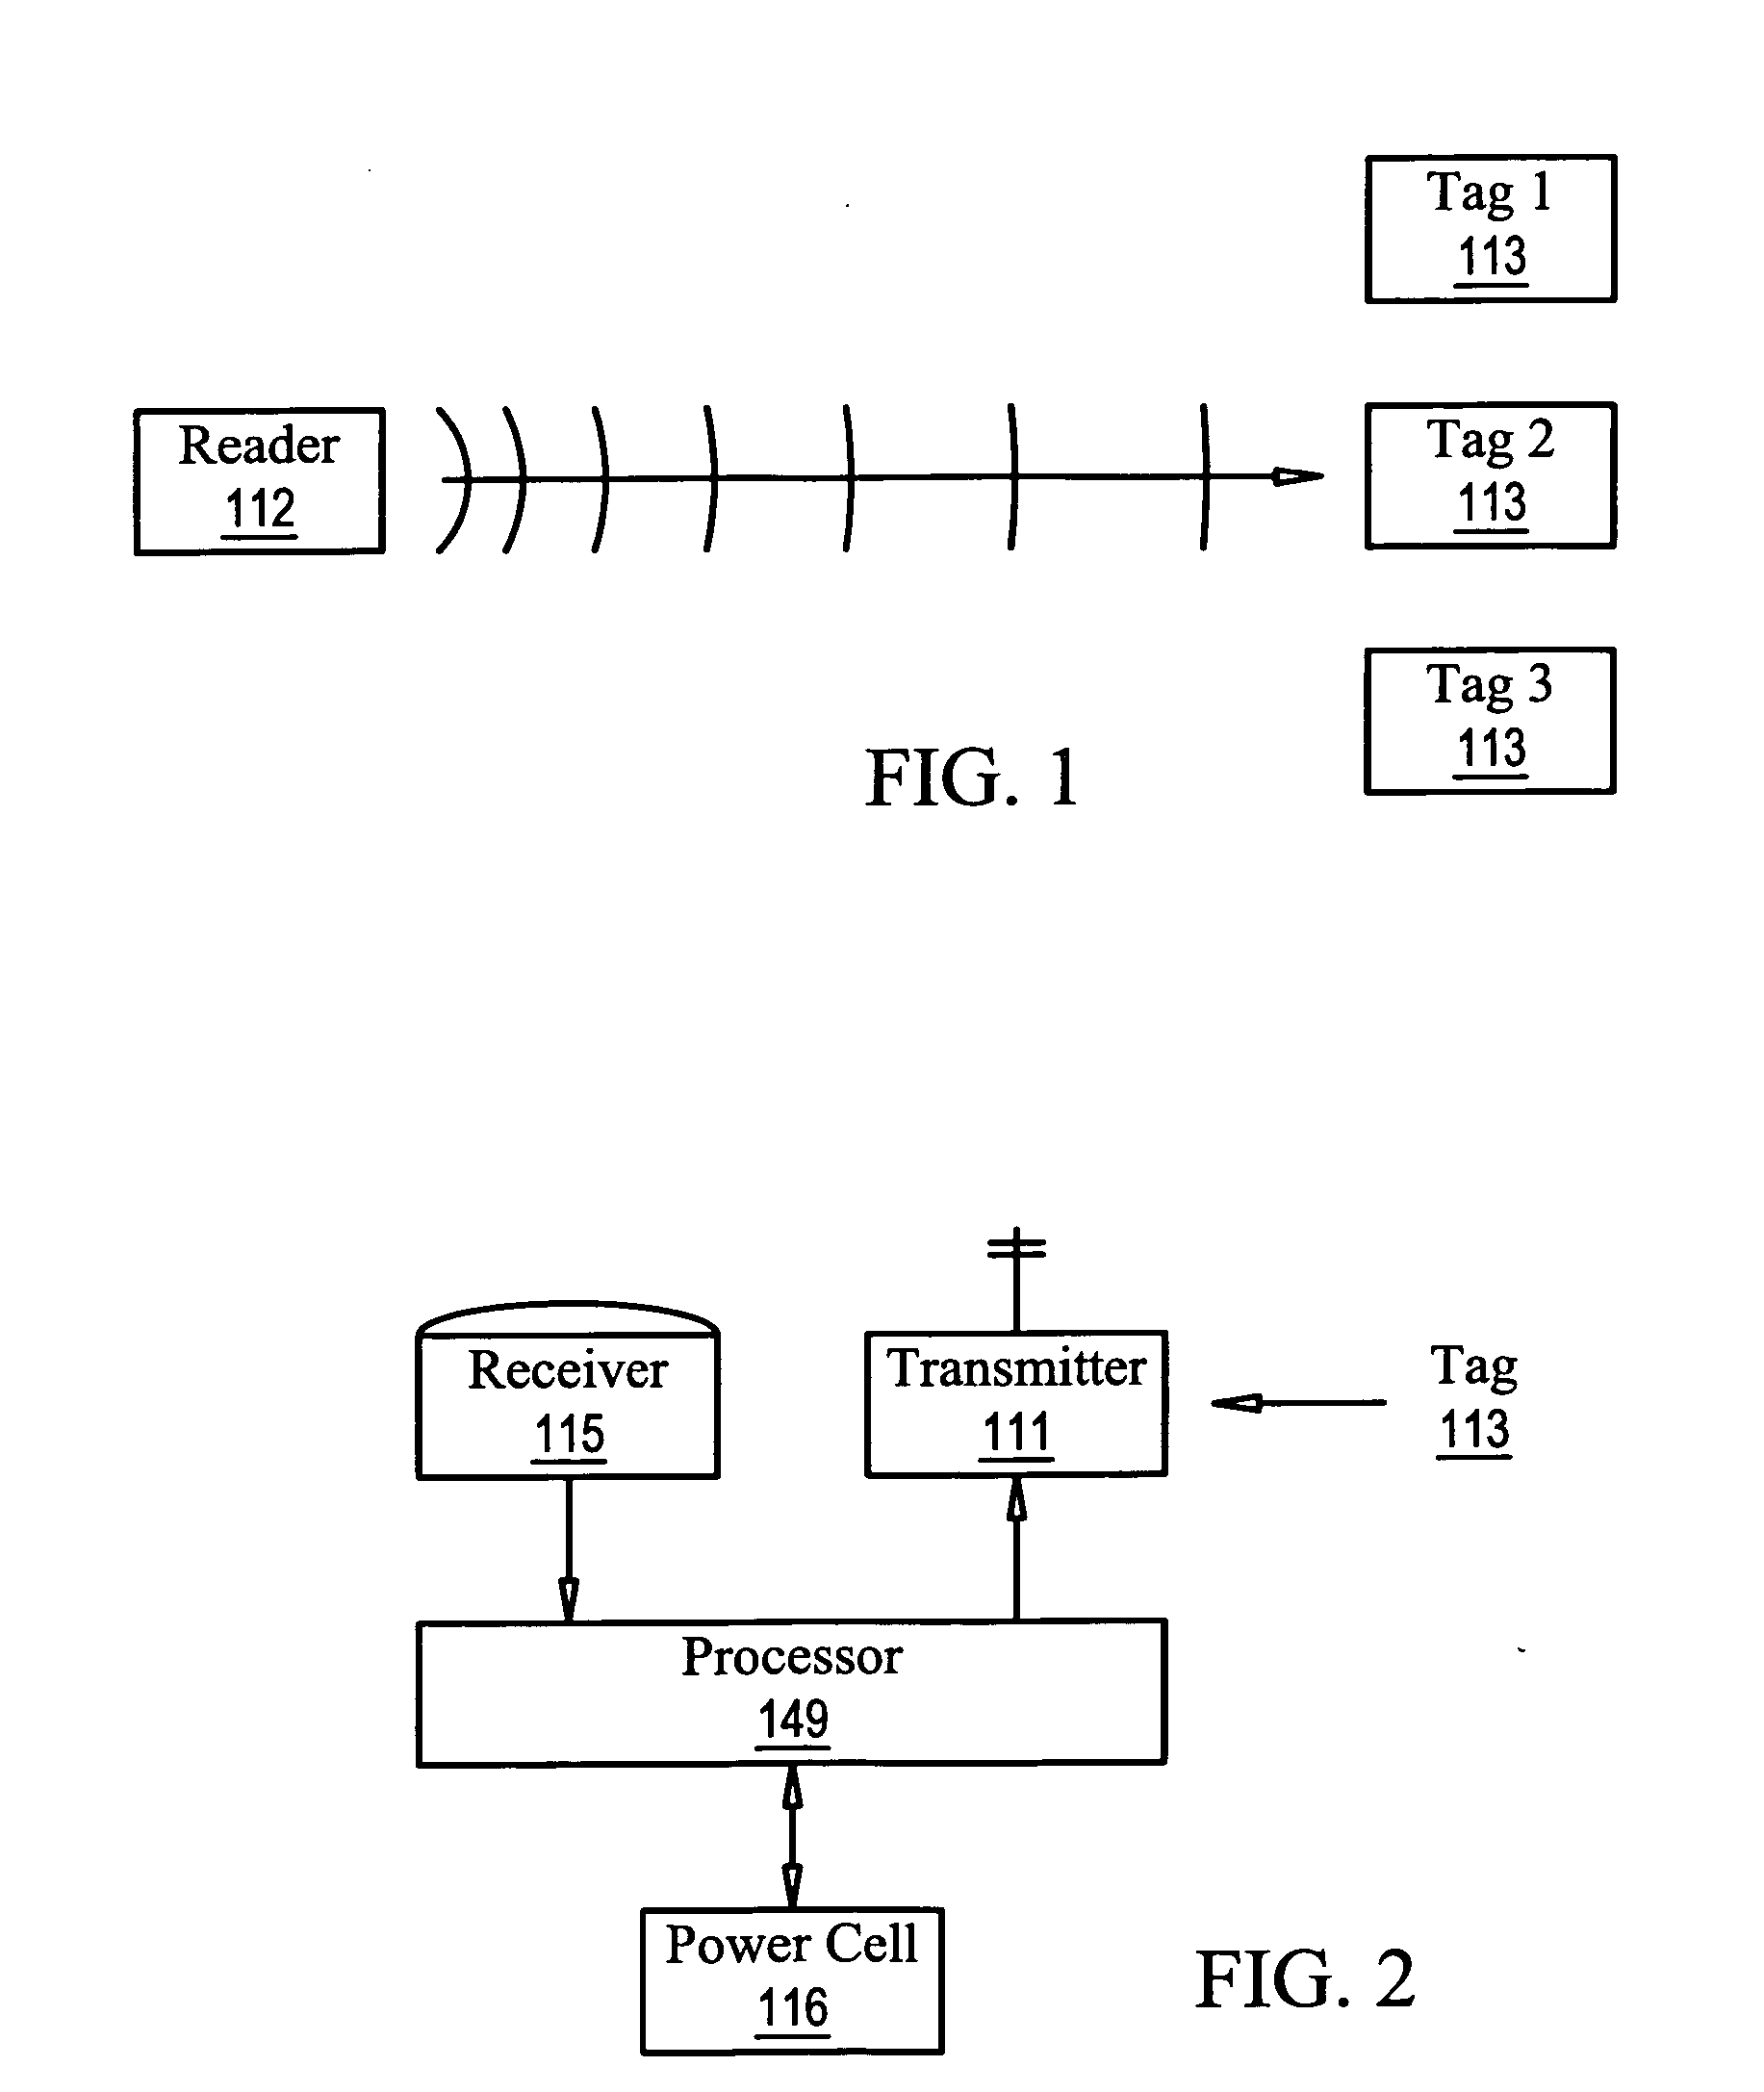 Interactive networking device